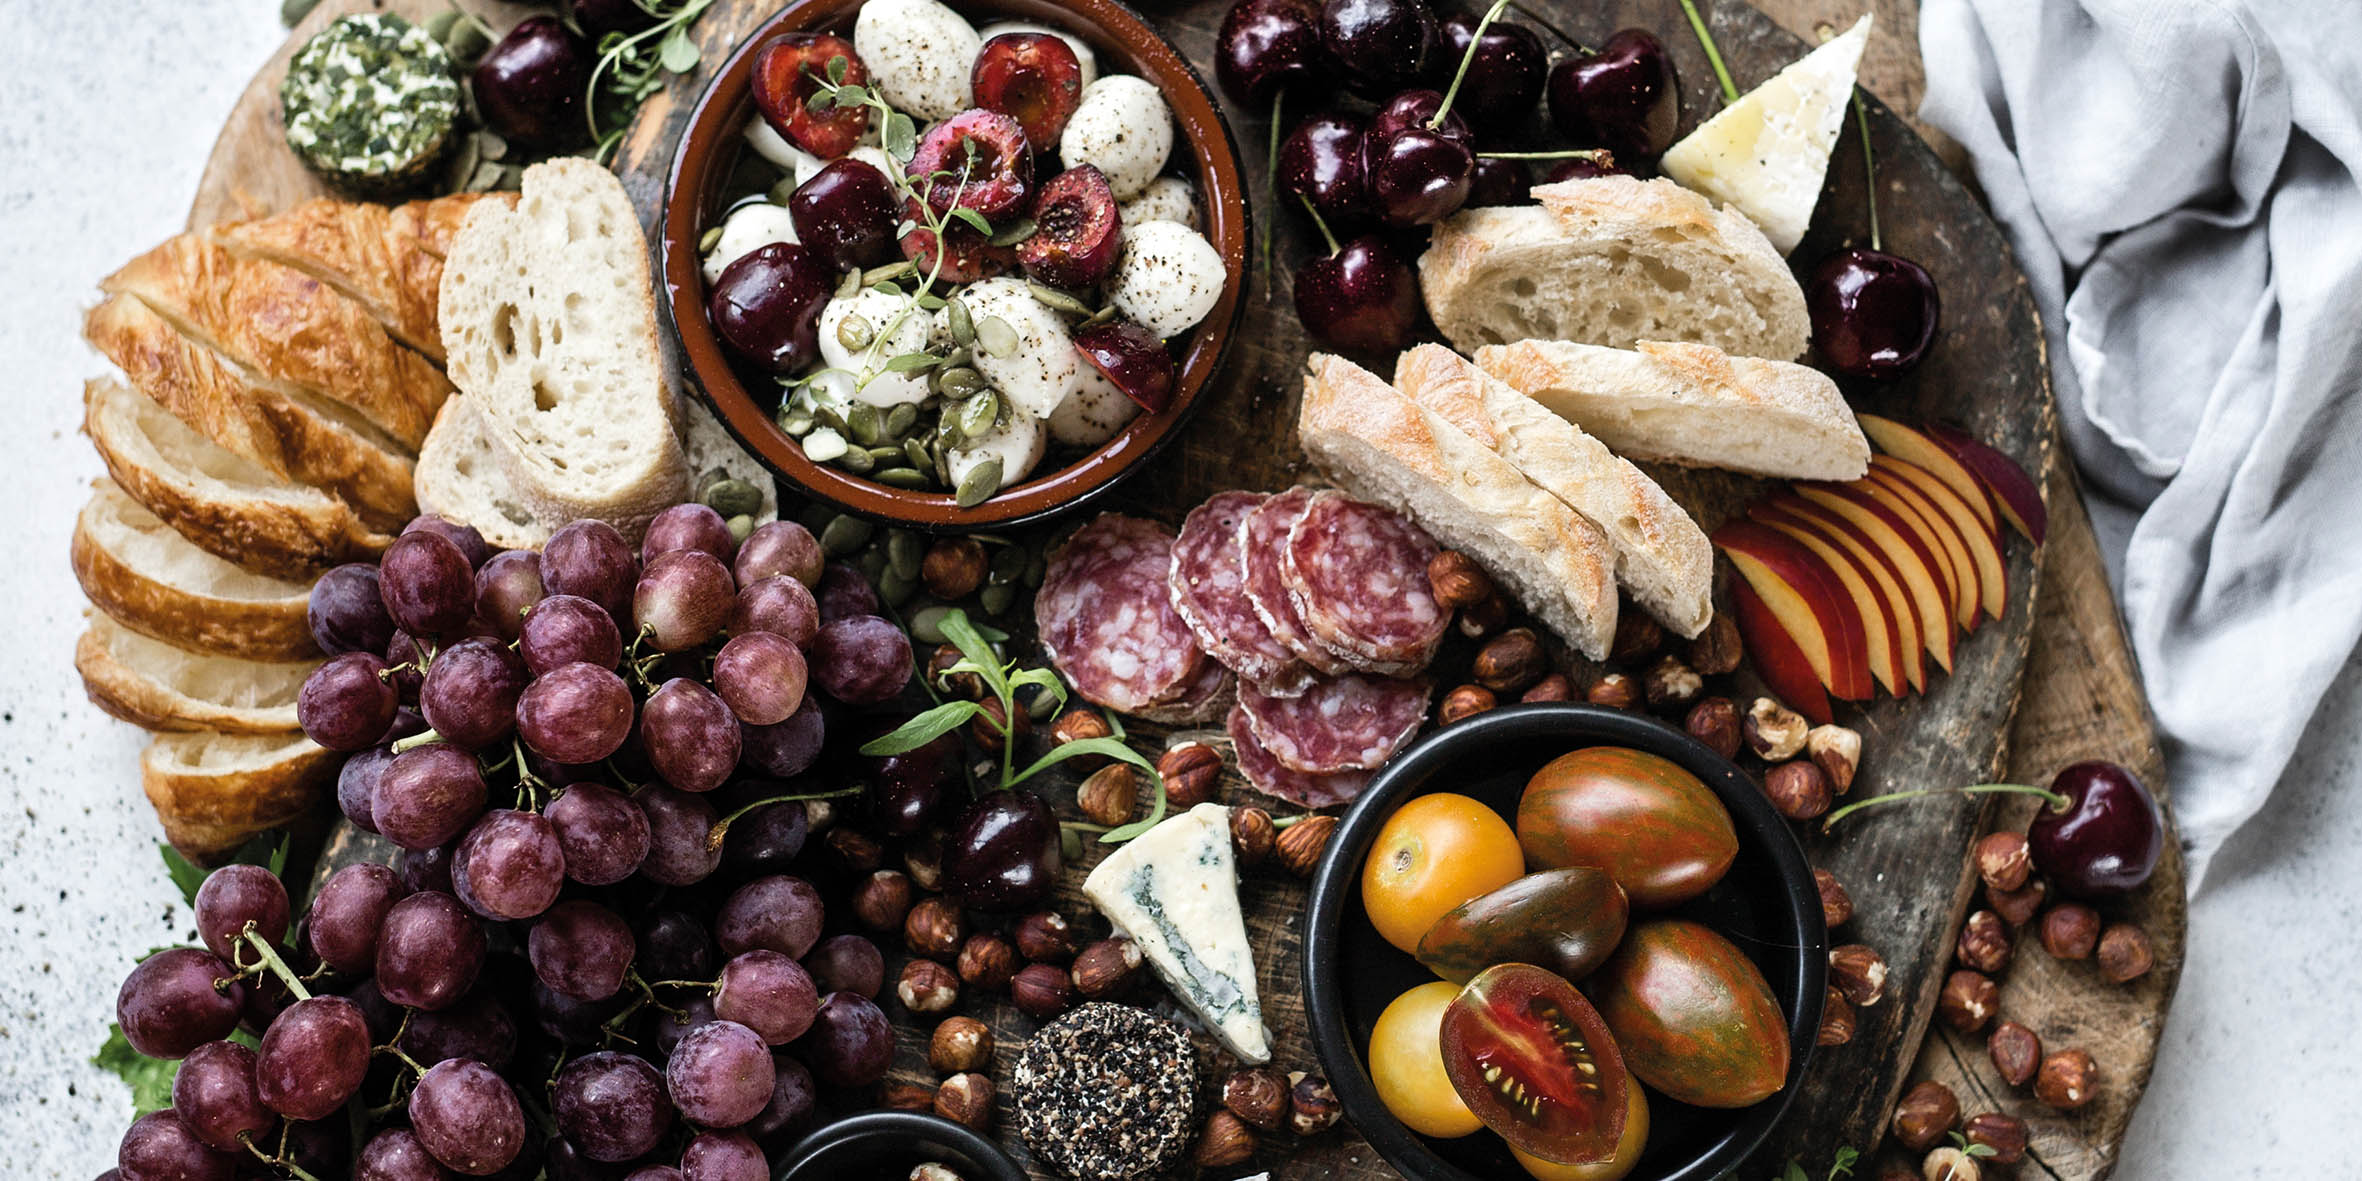 A wooden platter with cheese, crackers, grapes and other tasty foods.